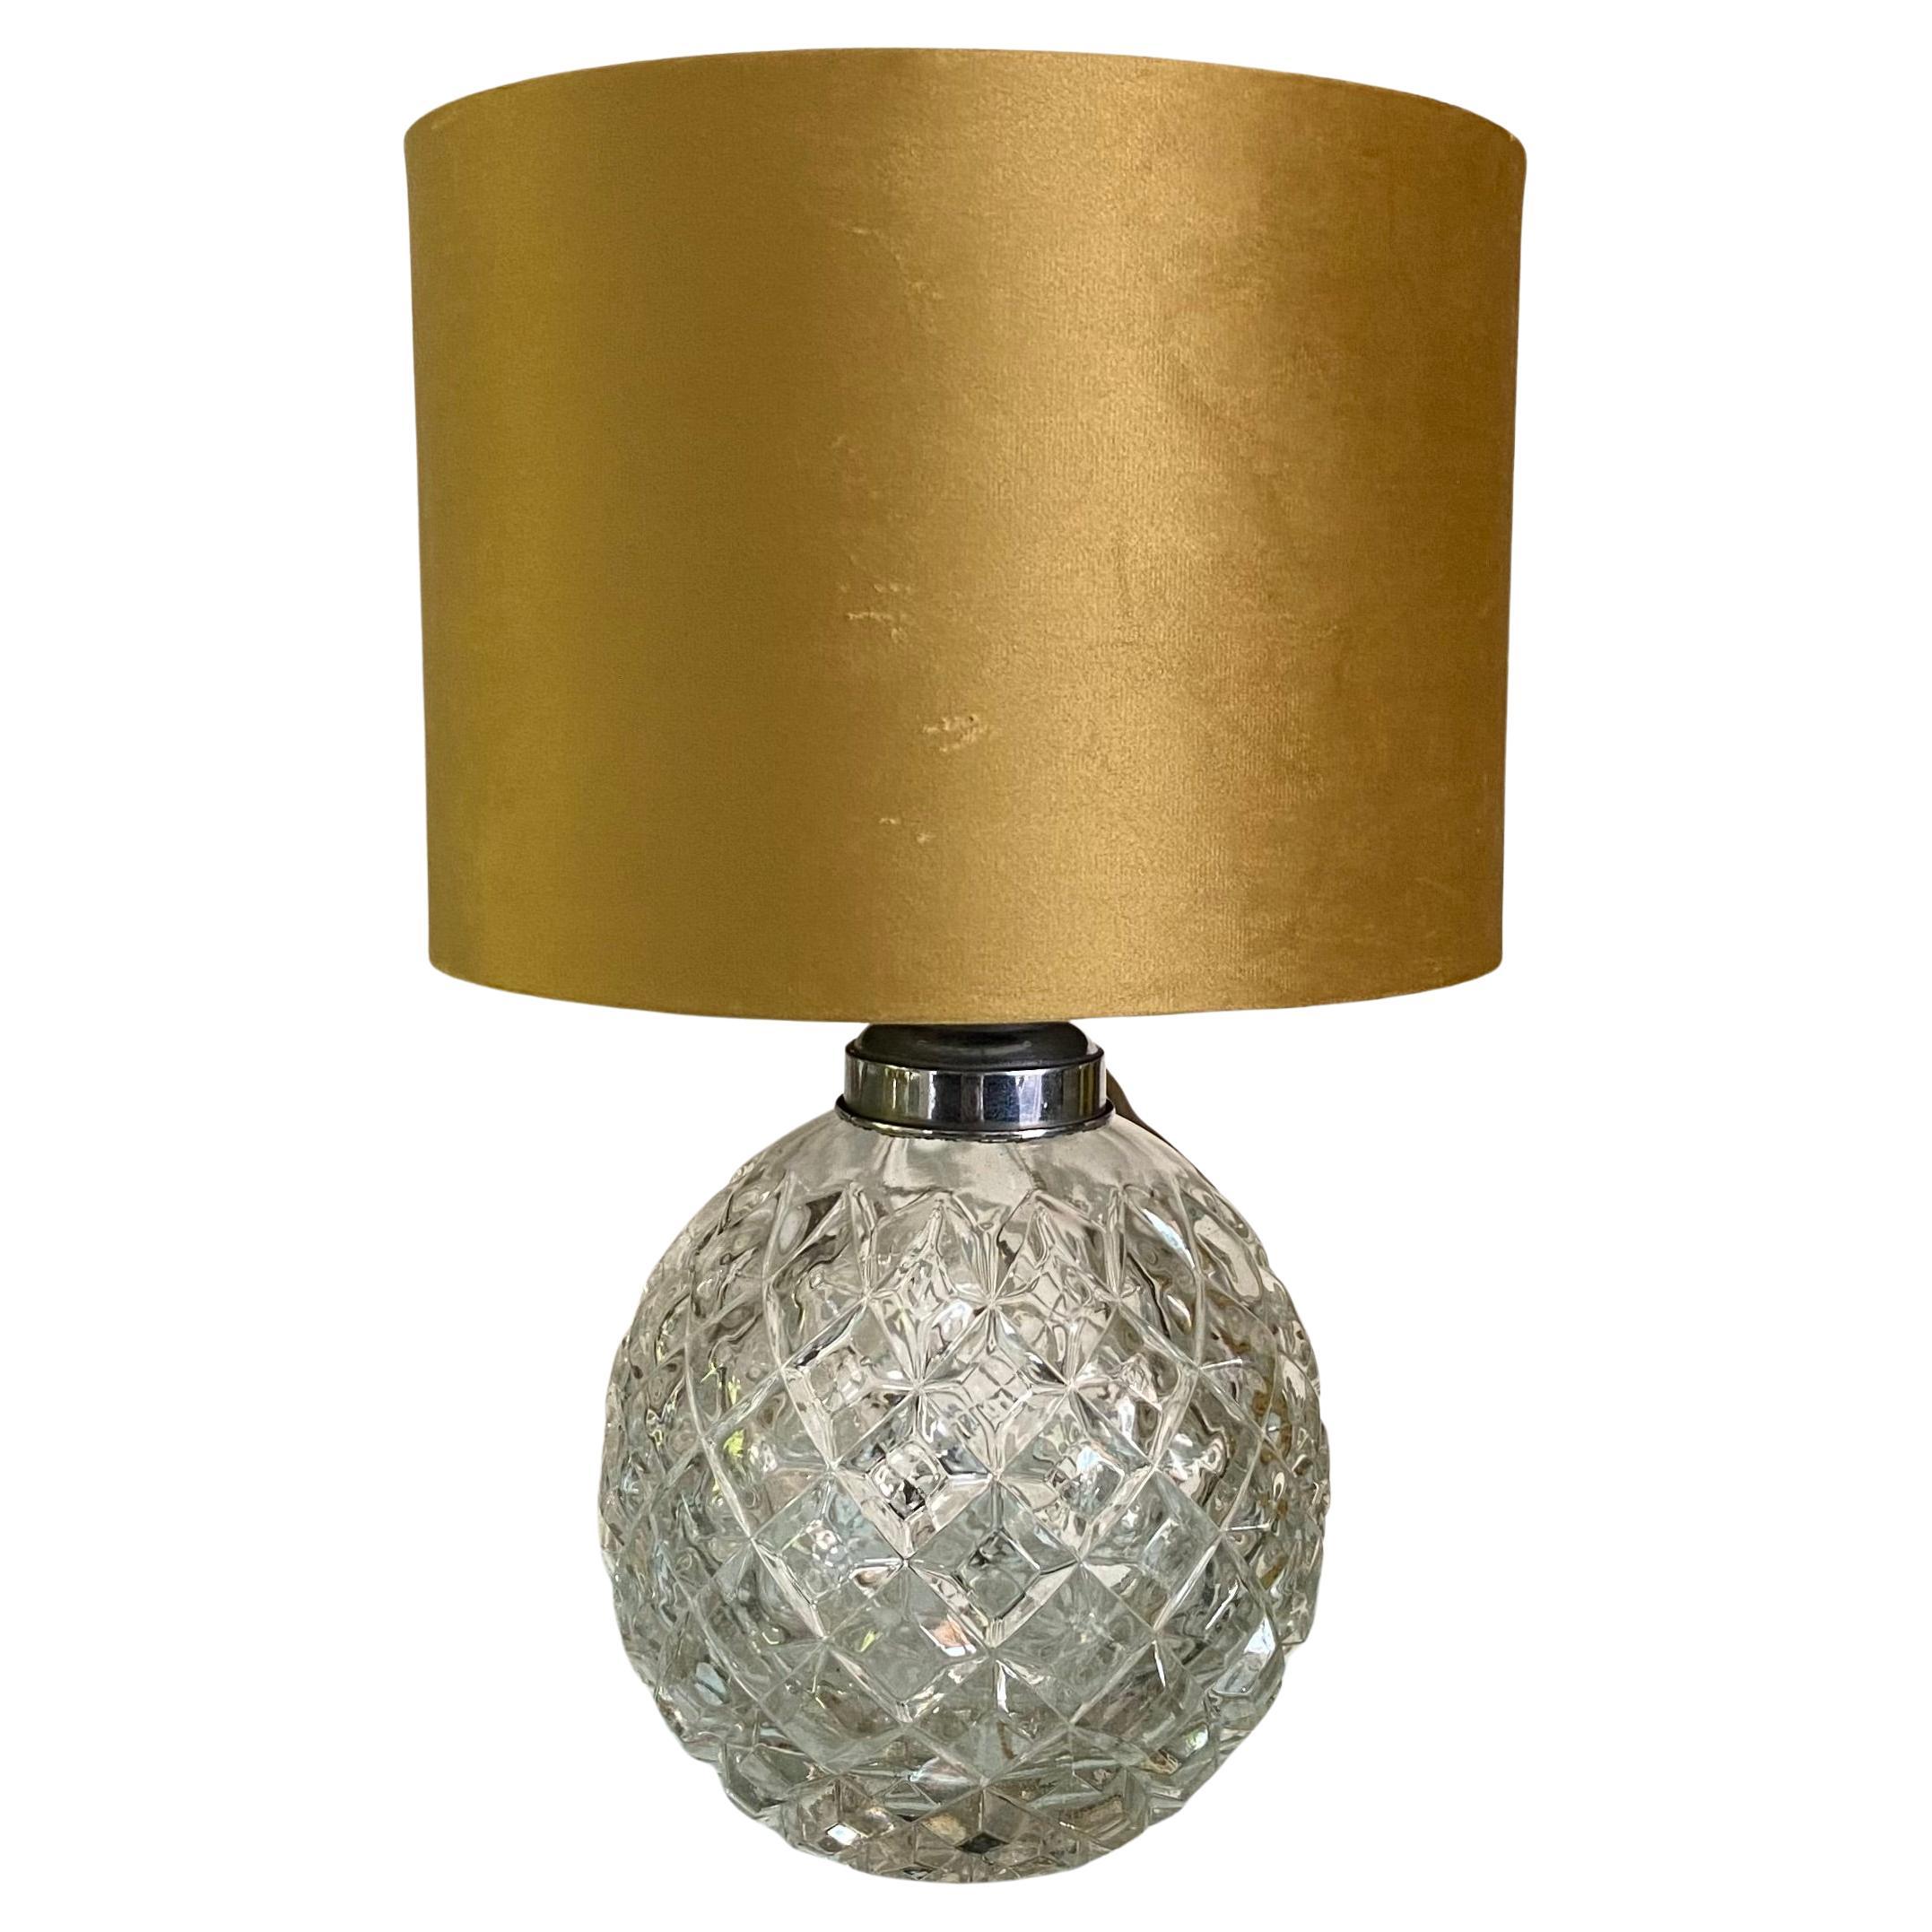 Crystal table lamp For Sale